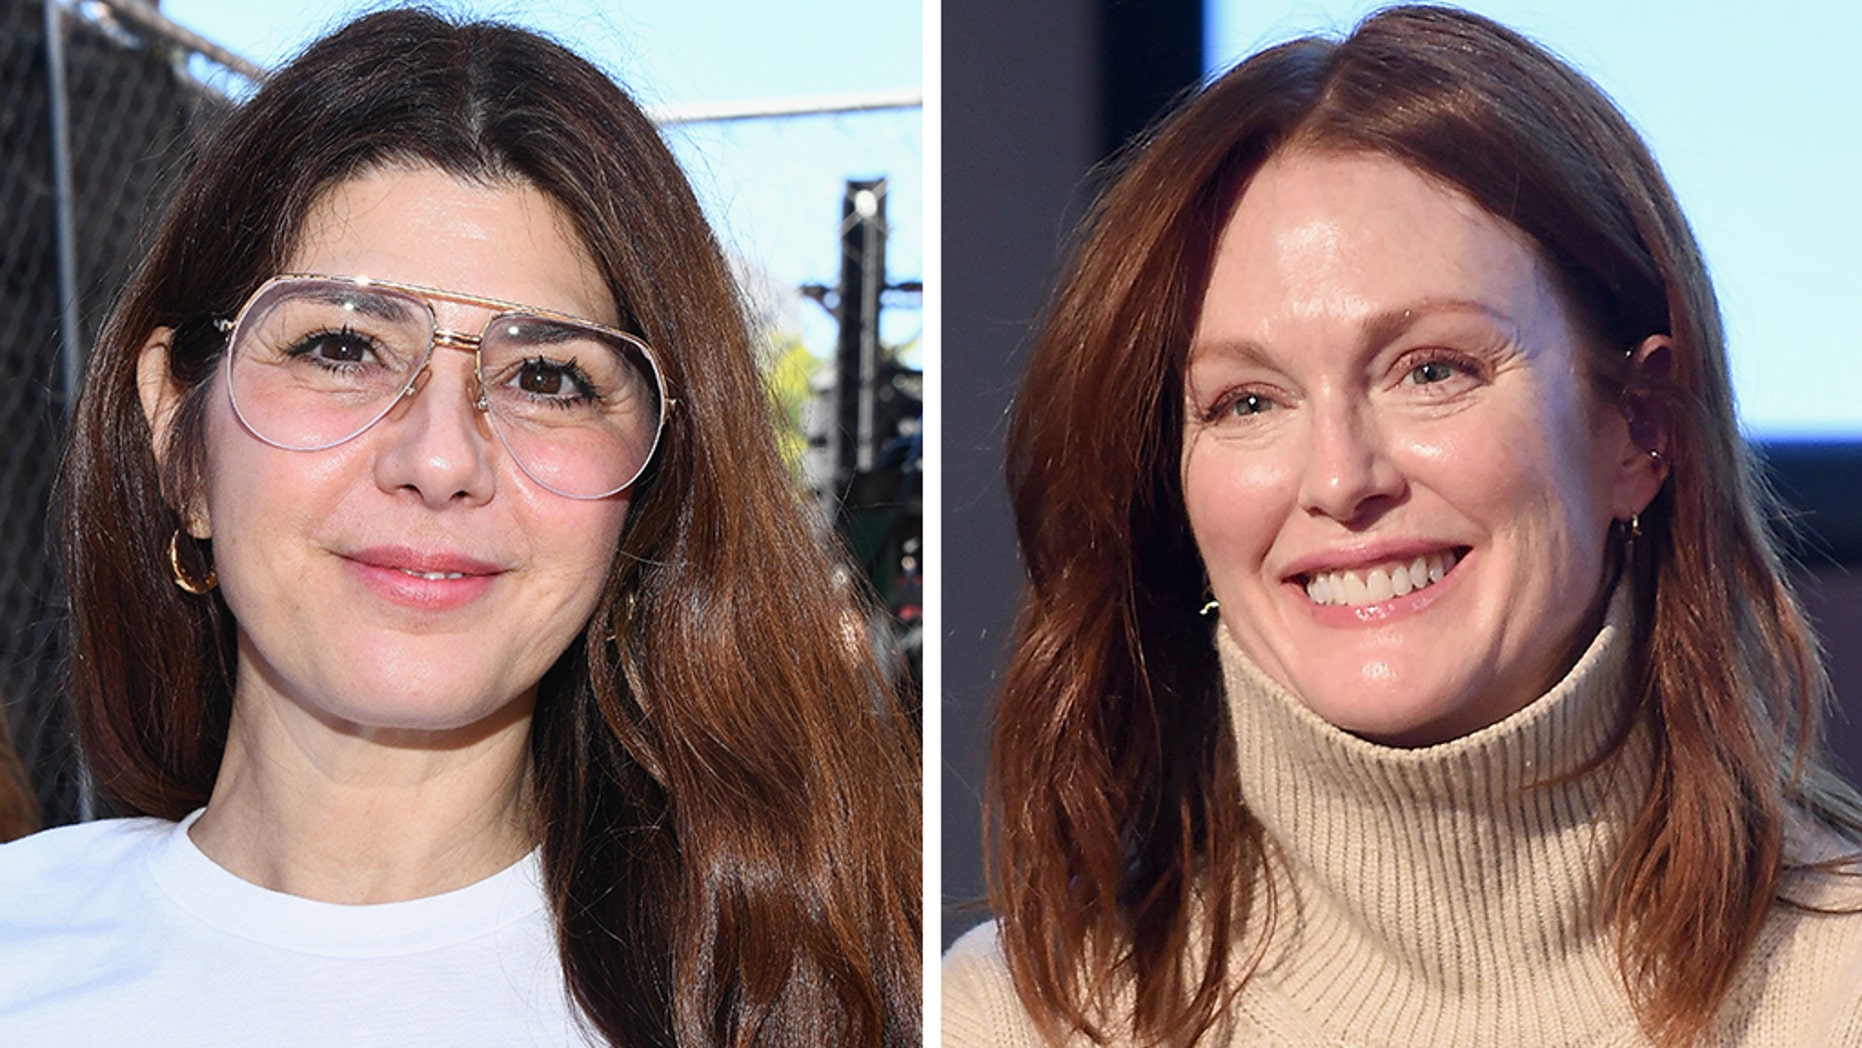 Marissa Tomei and Julianne Moore discover they